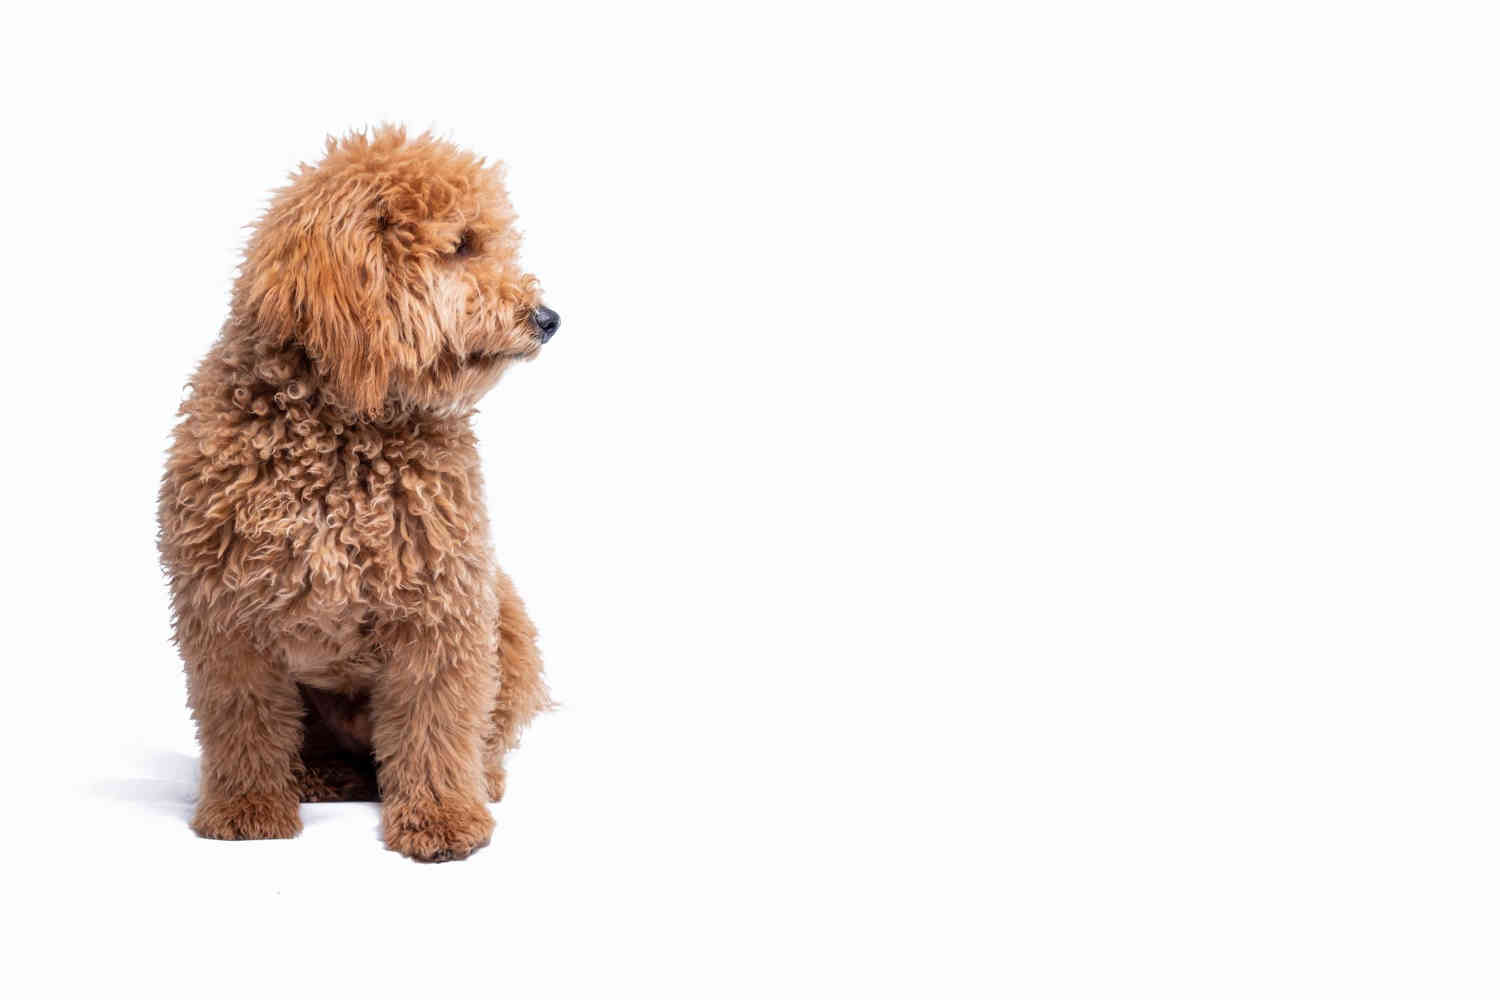 Goldendoodles as Therapy Dogs: Can They Help Alleviate Symptoms of Depression?